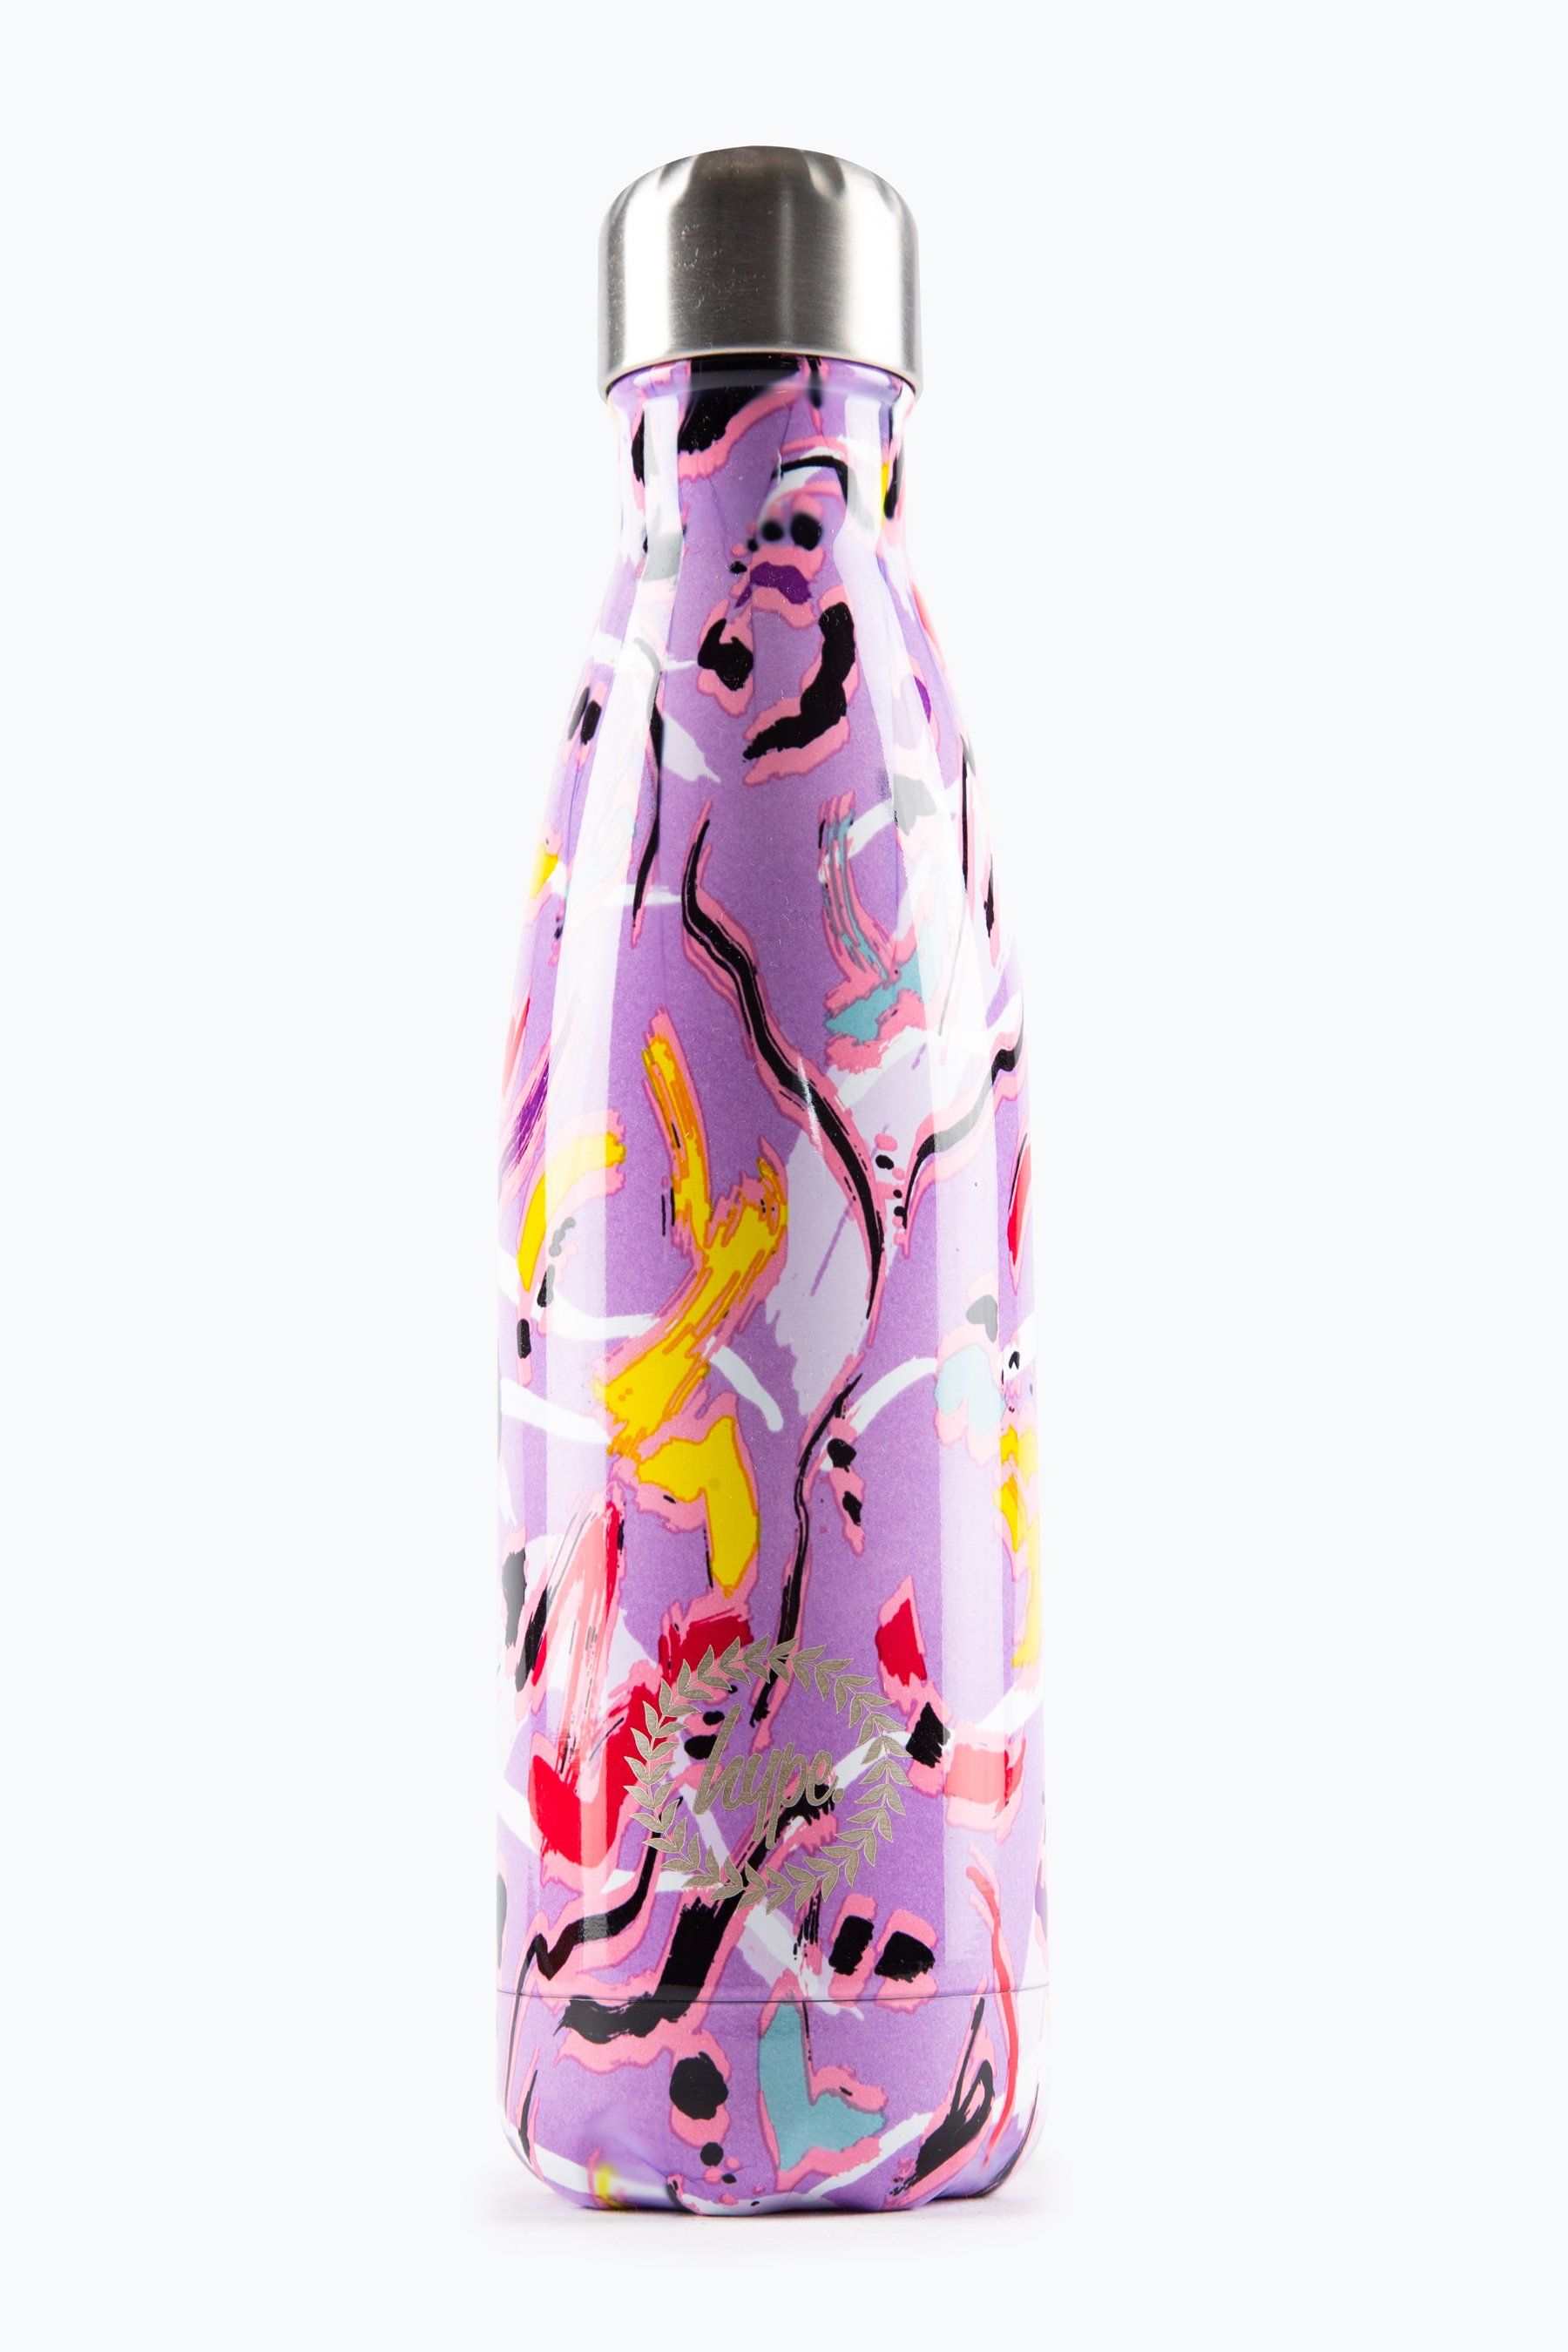 Keeping you hydrated, in style. Meet the HYPE. Abstract Animal Metal Reusable Water Bottle, perfect for when you're on the go. The design features a paint-splat inspired effect in a pastel beige, blue and yellow. Designed in Aluminium to ensure your water stays ice-cold and for chillier days, keeping your oat milk latte warm for longer. Reuse it again and again with an airtight screw lid prevents spills. With an all-over leopard animal skin inspired print with an abstract overlay in a pastel pink, purple and contrasting cyan colour palette. Why not grab one of our lunch bags or backpacks with a bottle holder to complete the look. Hand wash only.